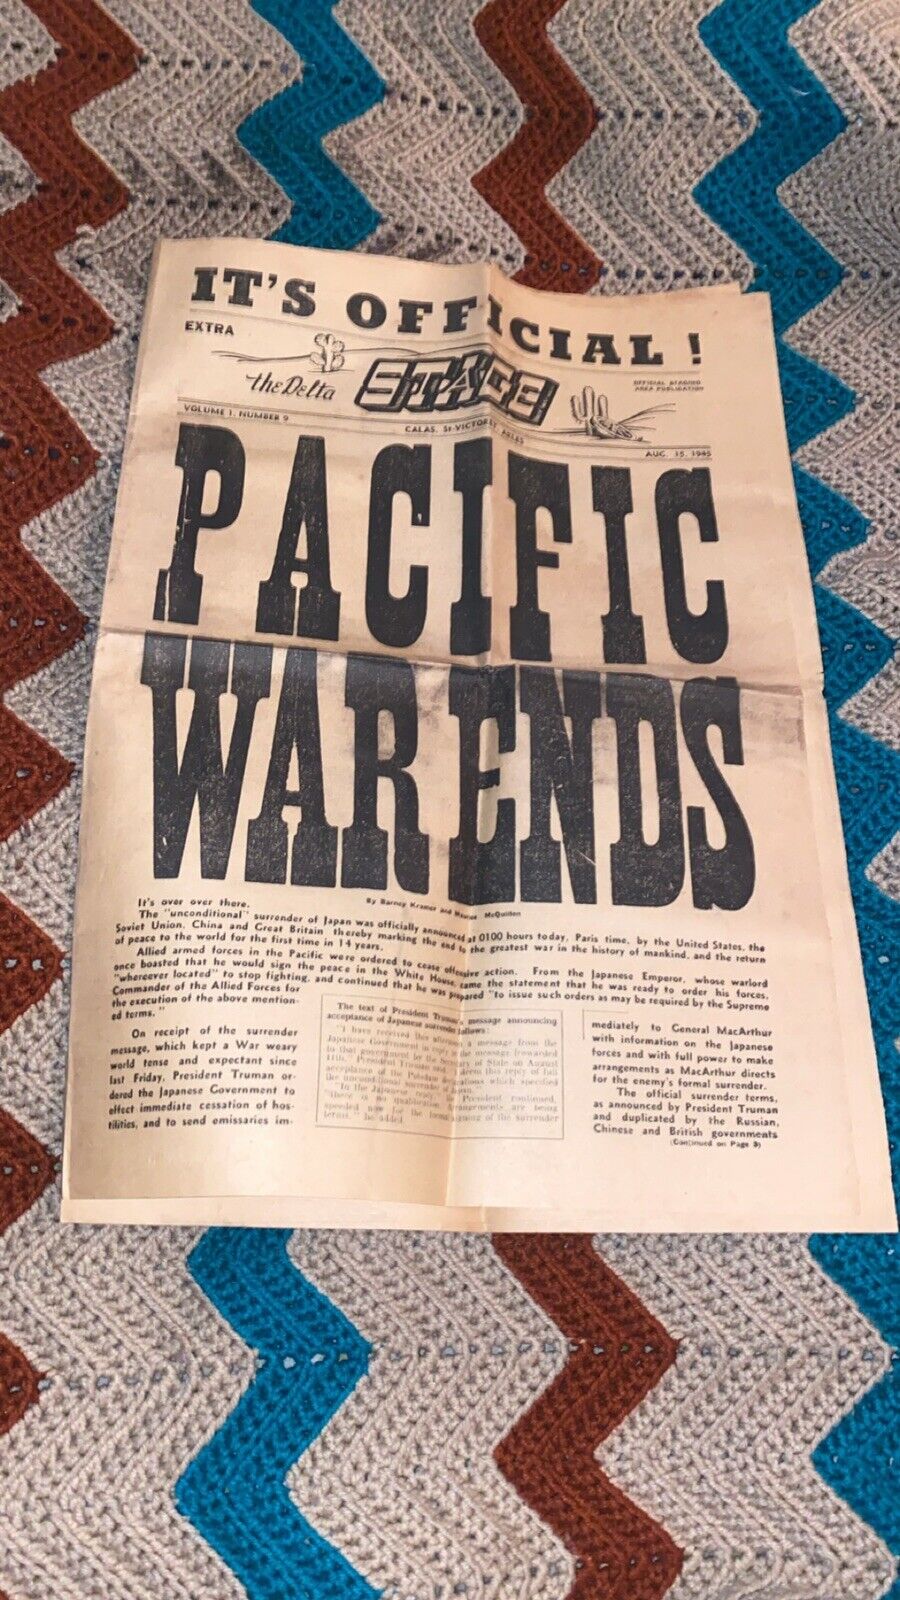 Aug. 15 1945 The Delta Stage Newspaper Calais France “Pacific War Ends” Rare